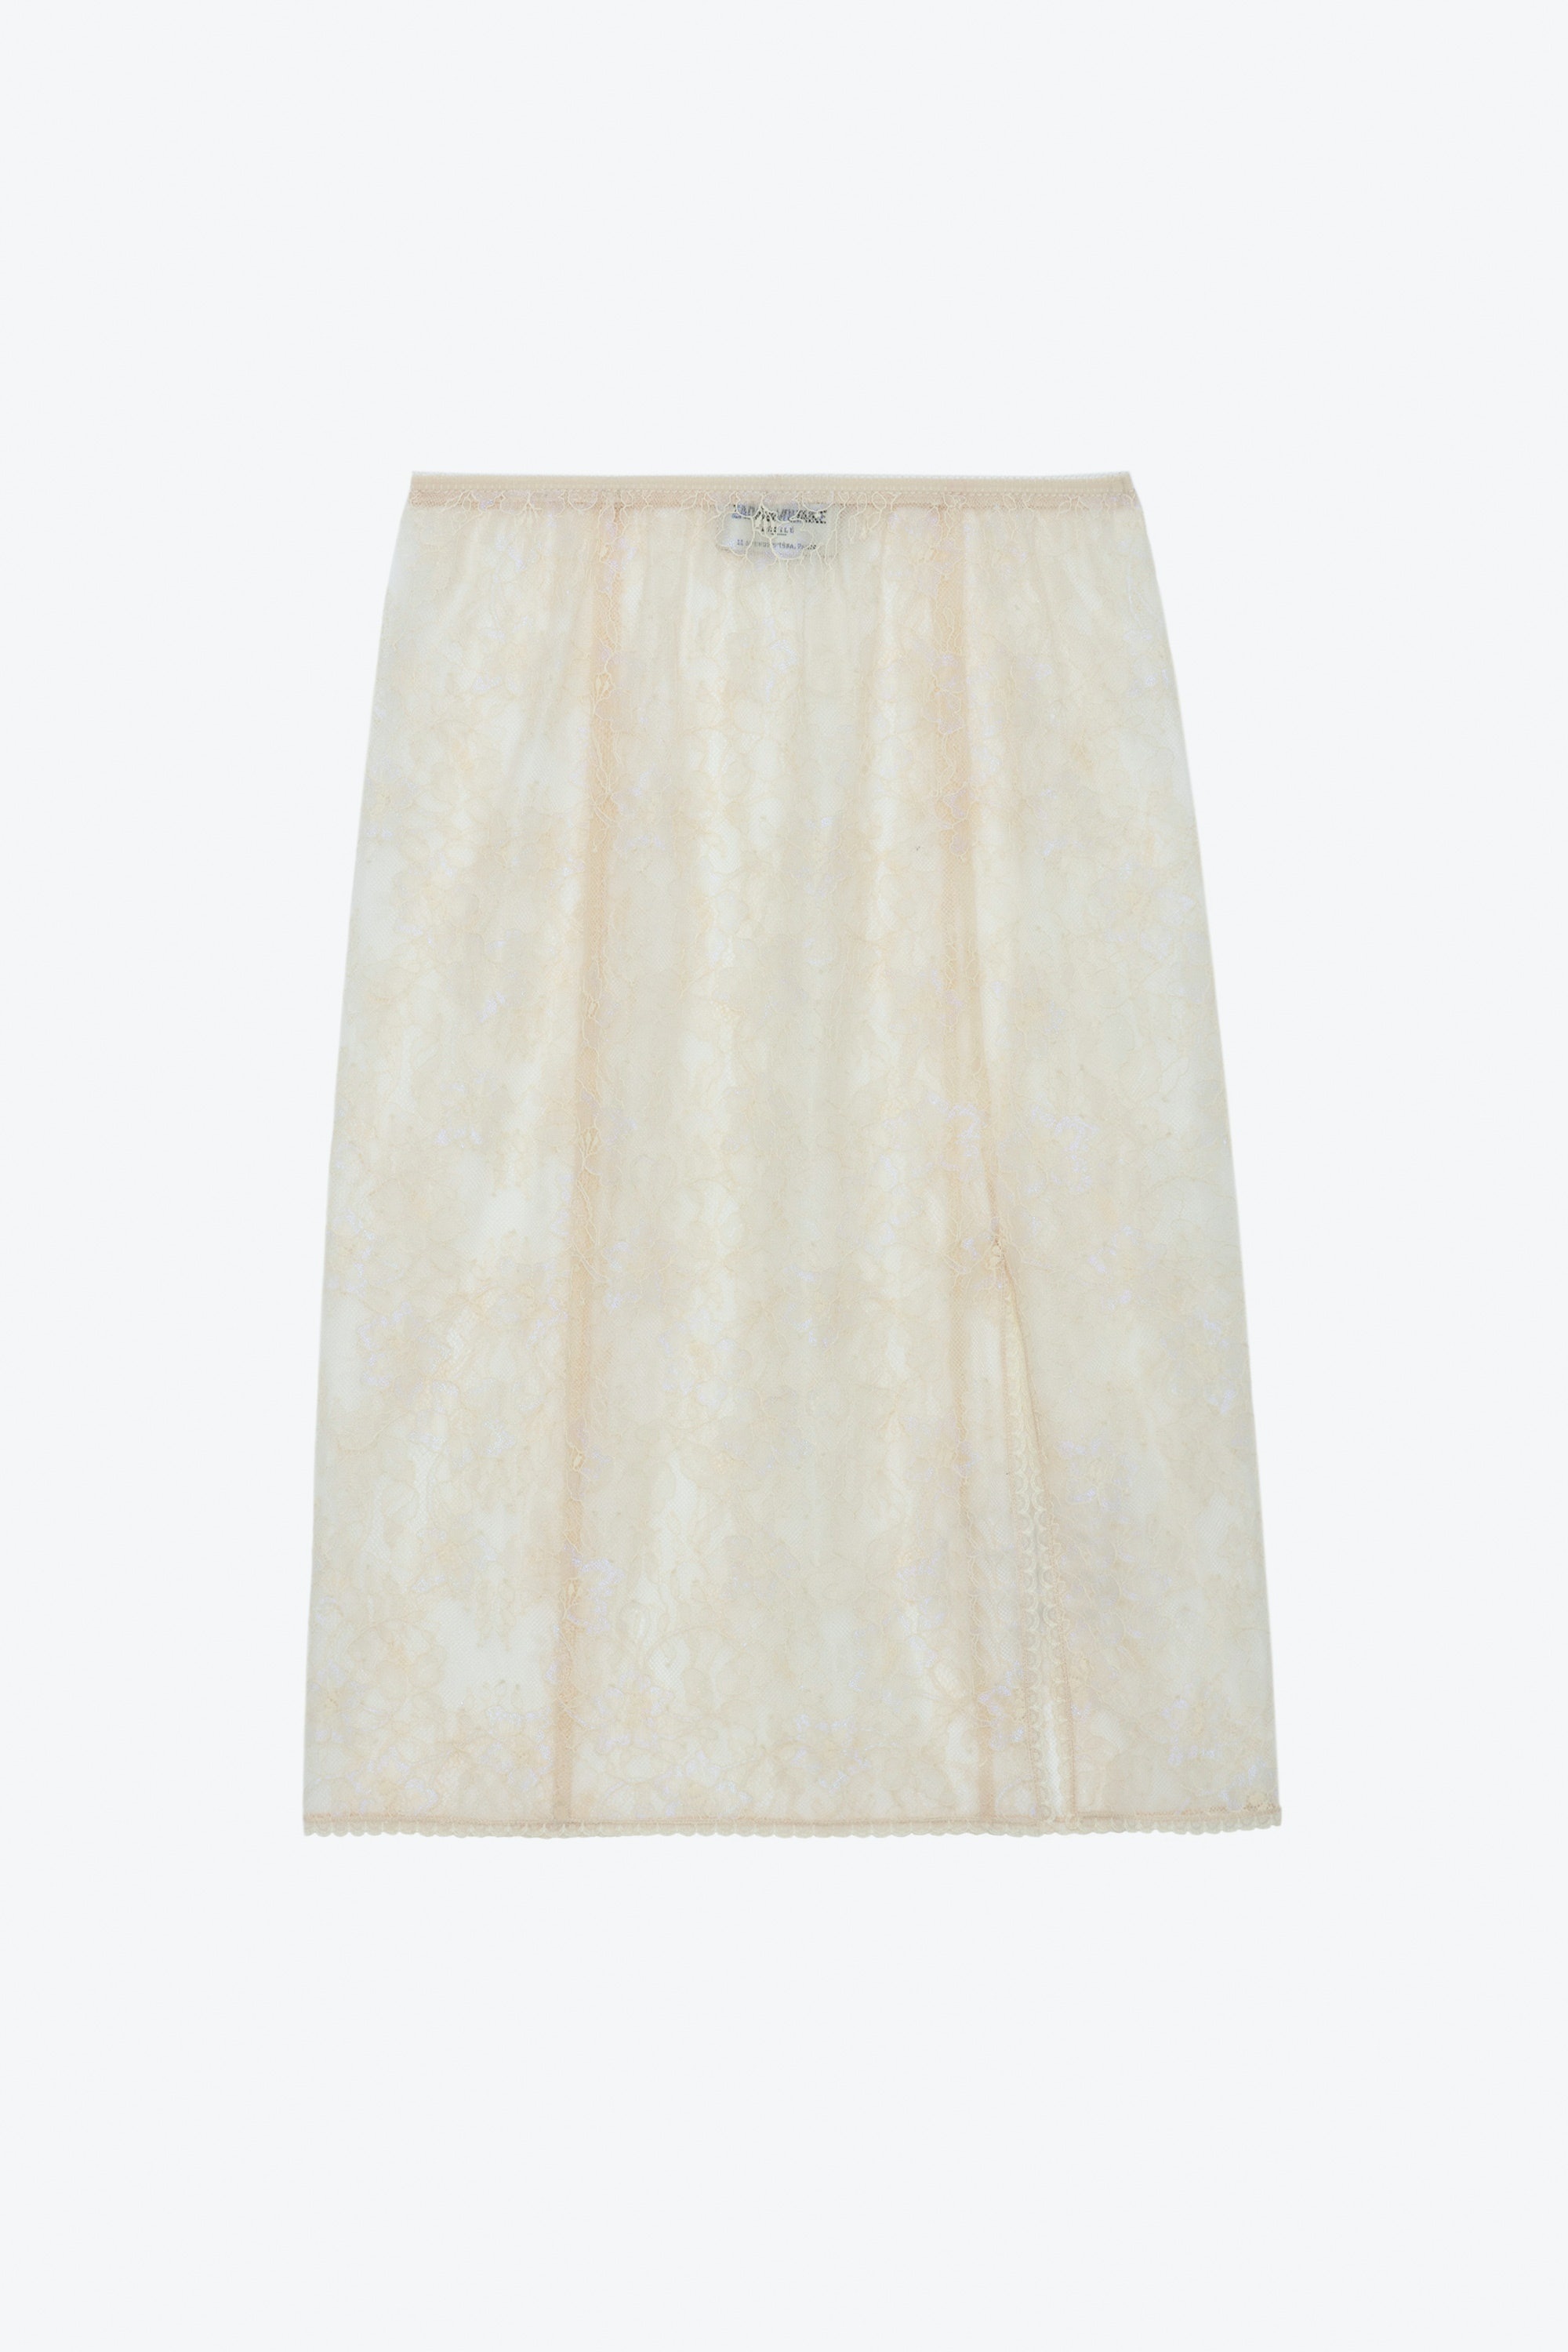 Justicia Skirt - 1